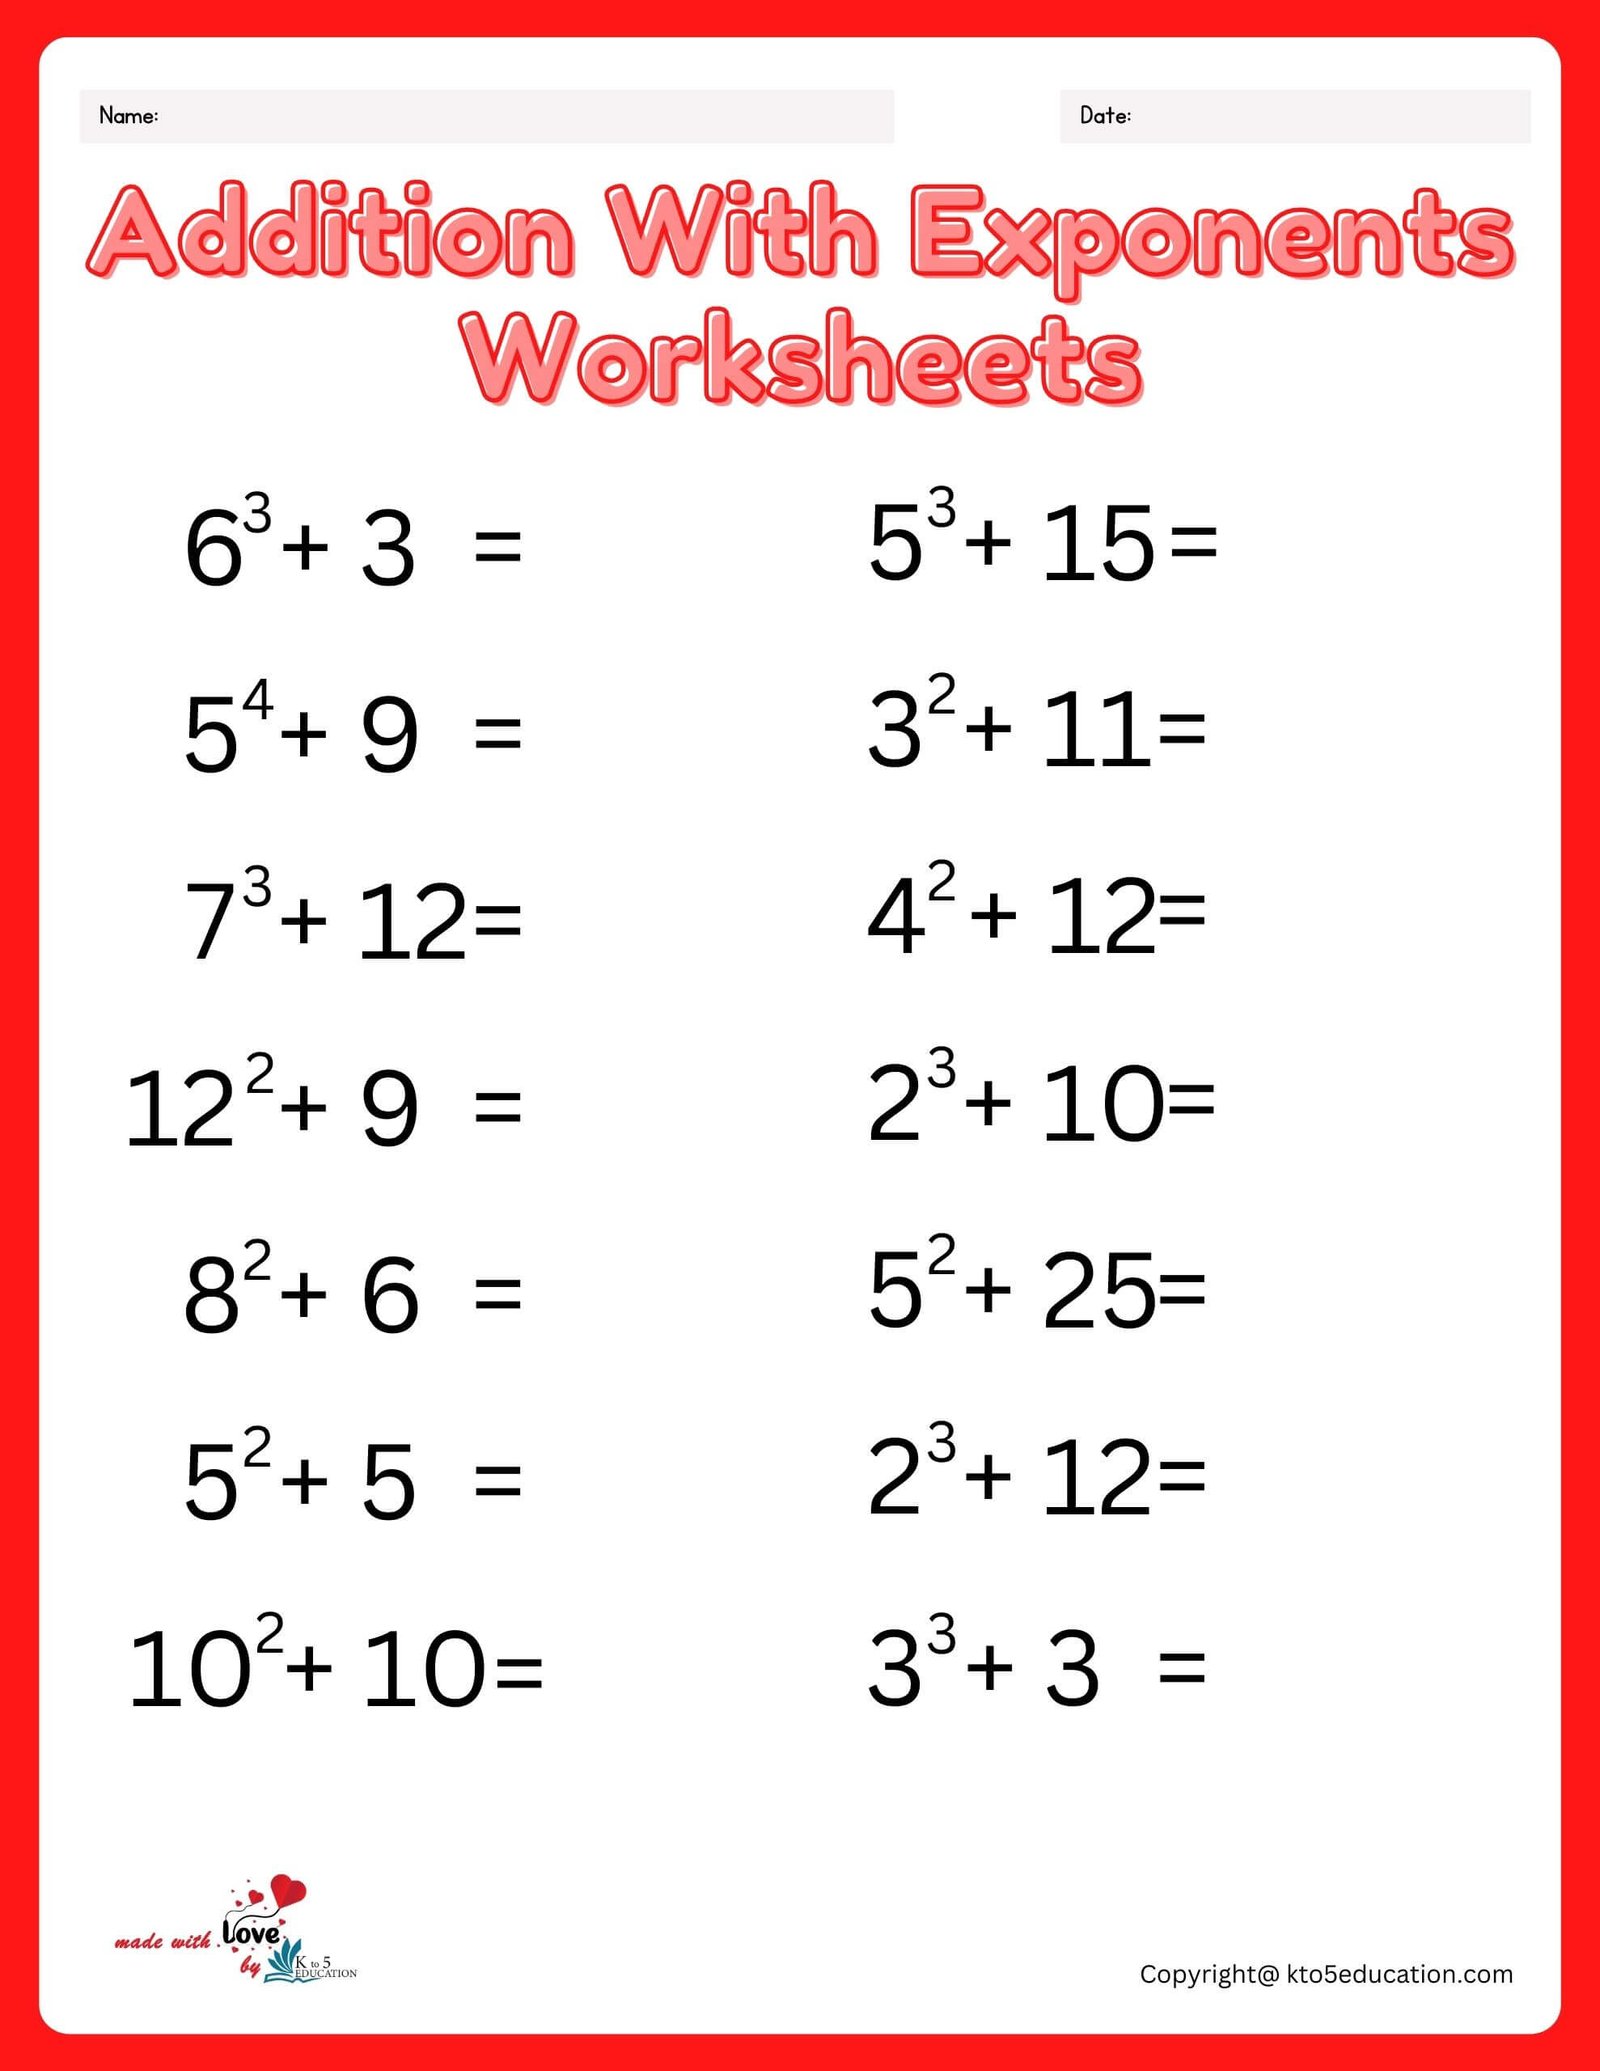 Free Addition With Exponents Worksheet Printable